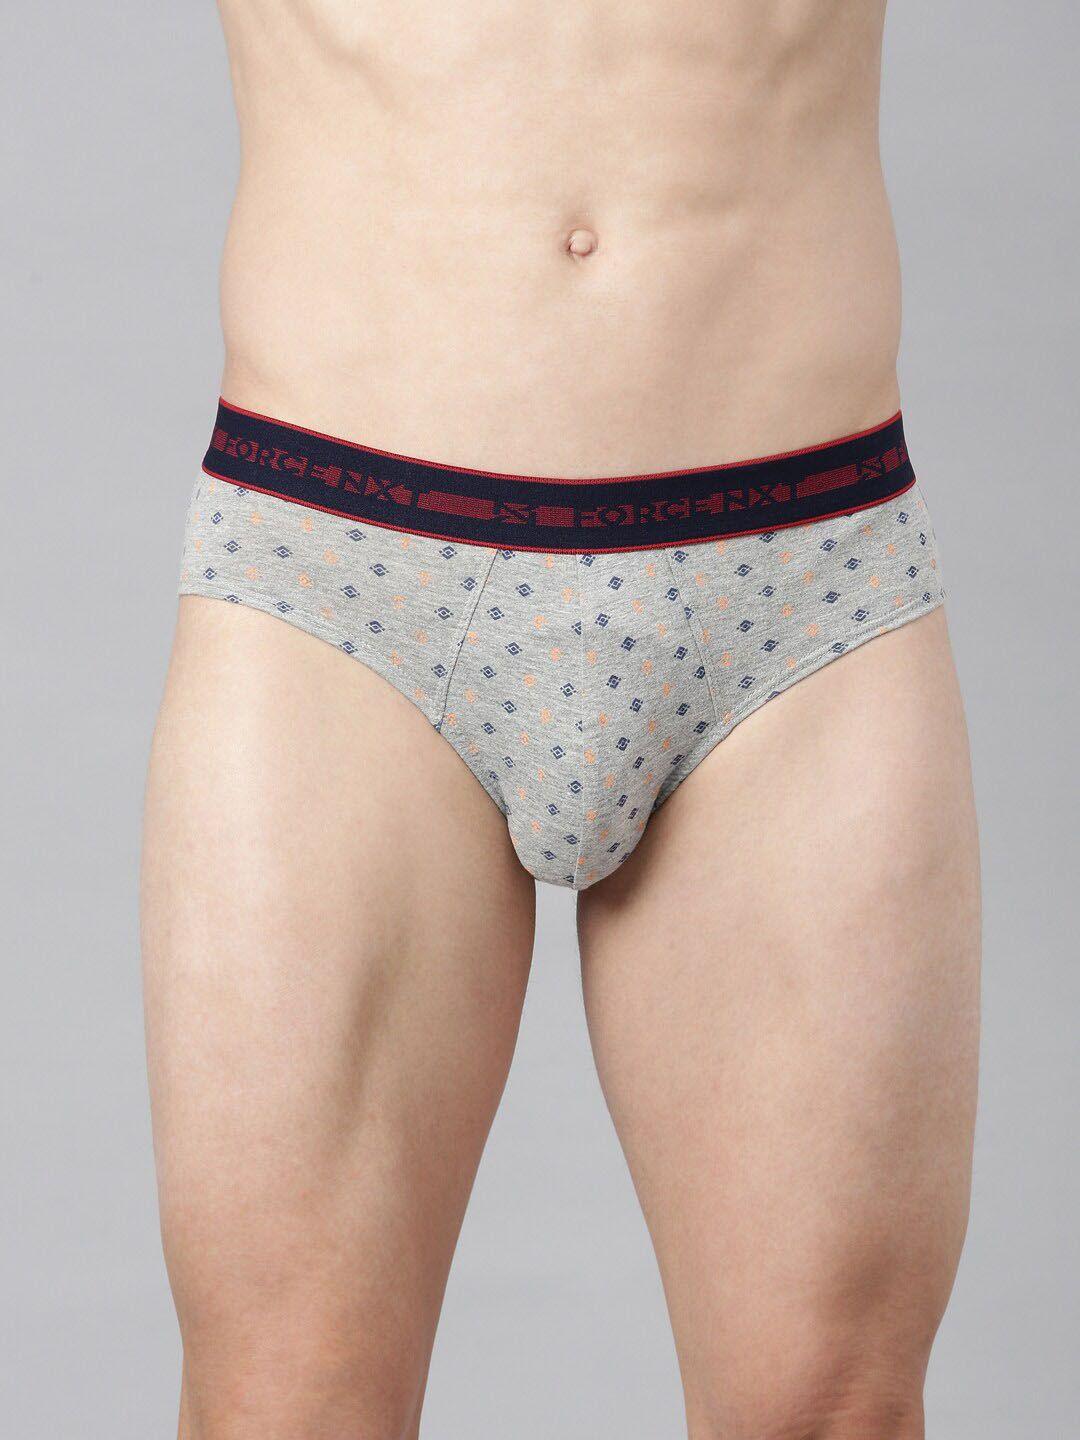 force-nxt-men-grey-&-blue-printed-pure-combed-cotton-basic-briefs-mnff-116-print1